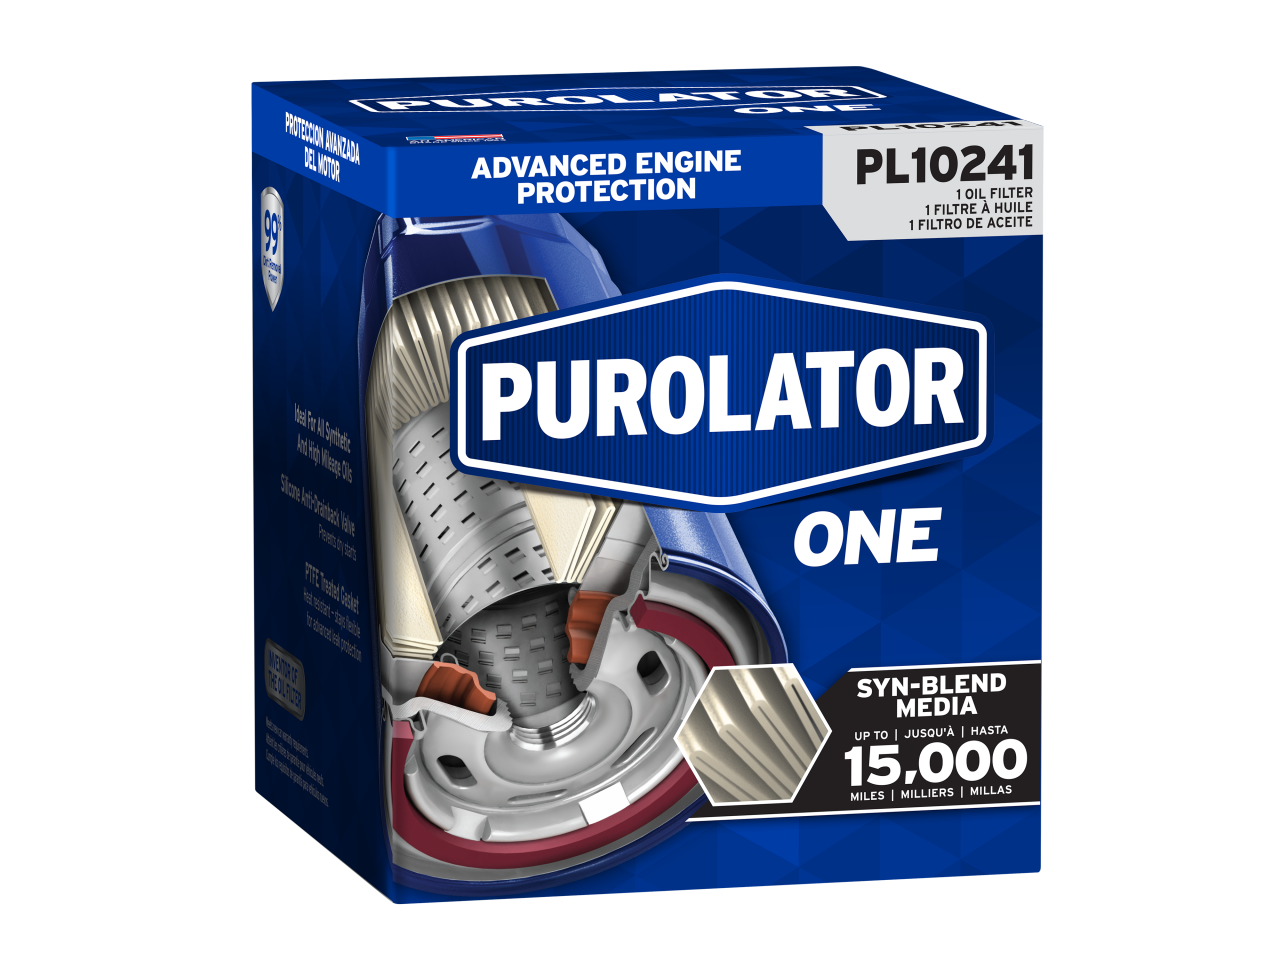 https://www.purolatornow.com/content/dam/website/purolator/family-pages/secondary-product-images/One_Oil-Filter_Box.png.transform/w.1280/image.png